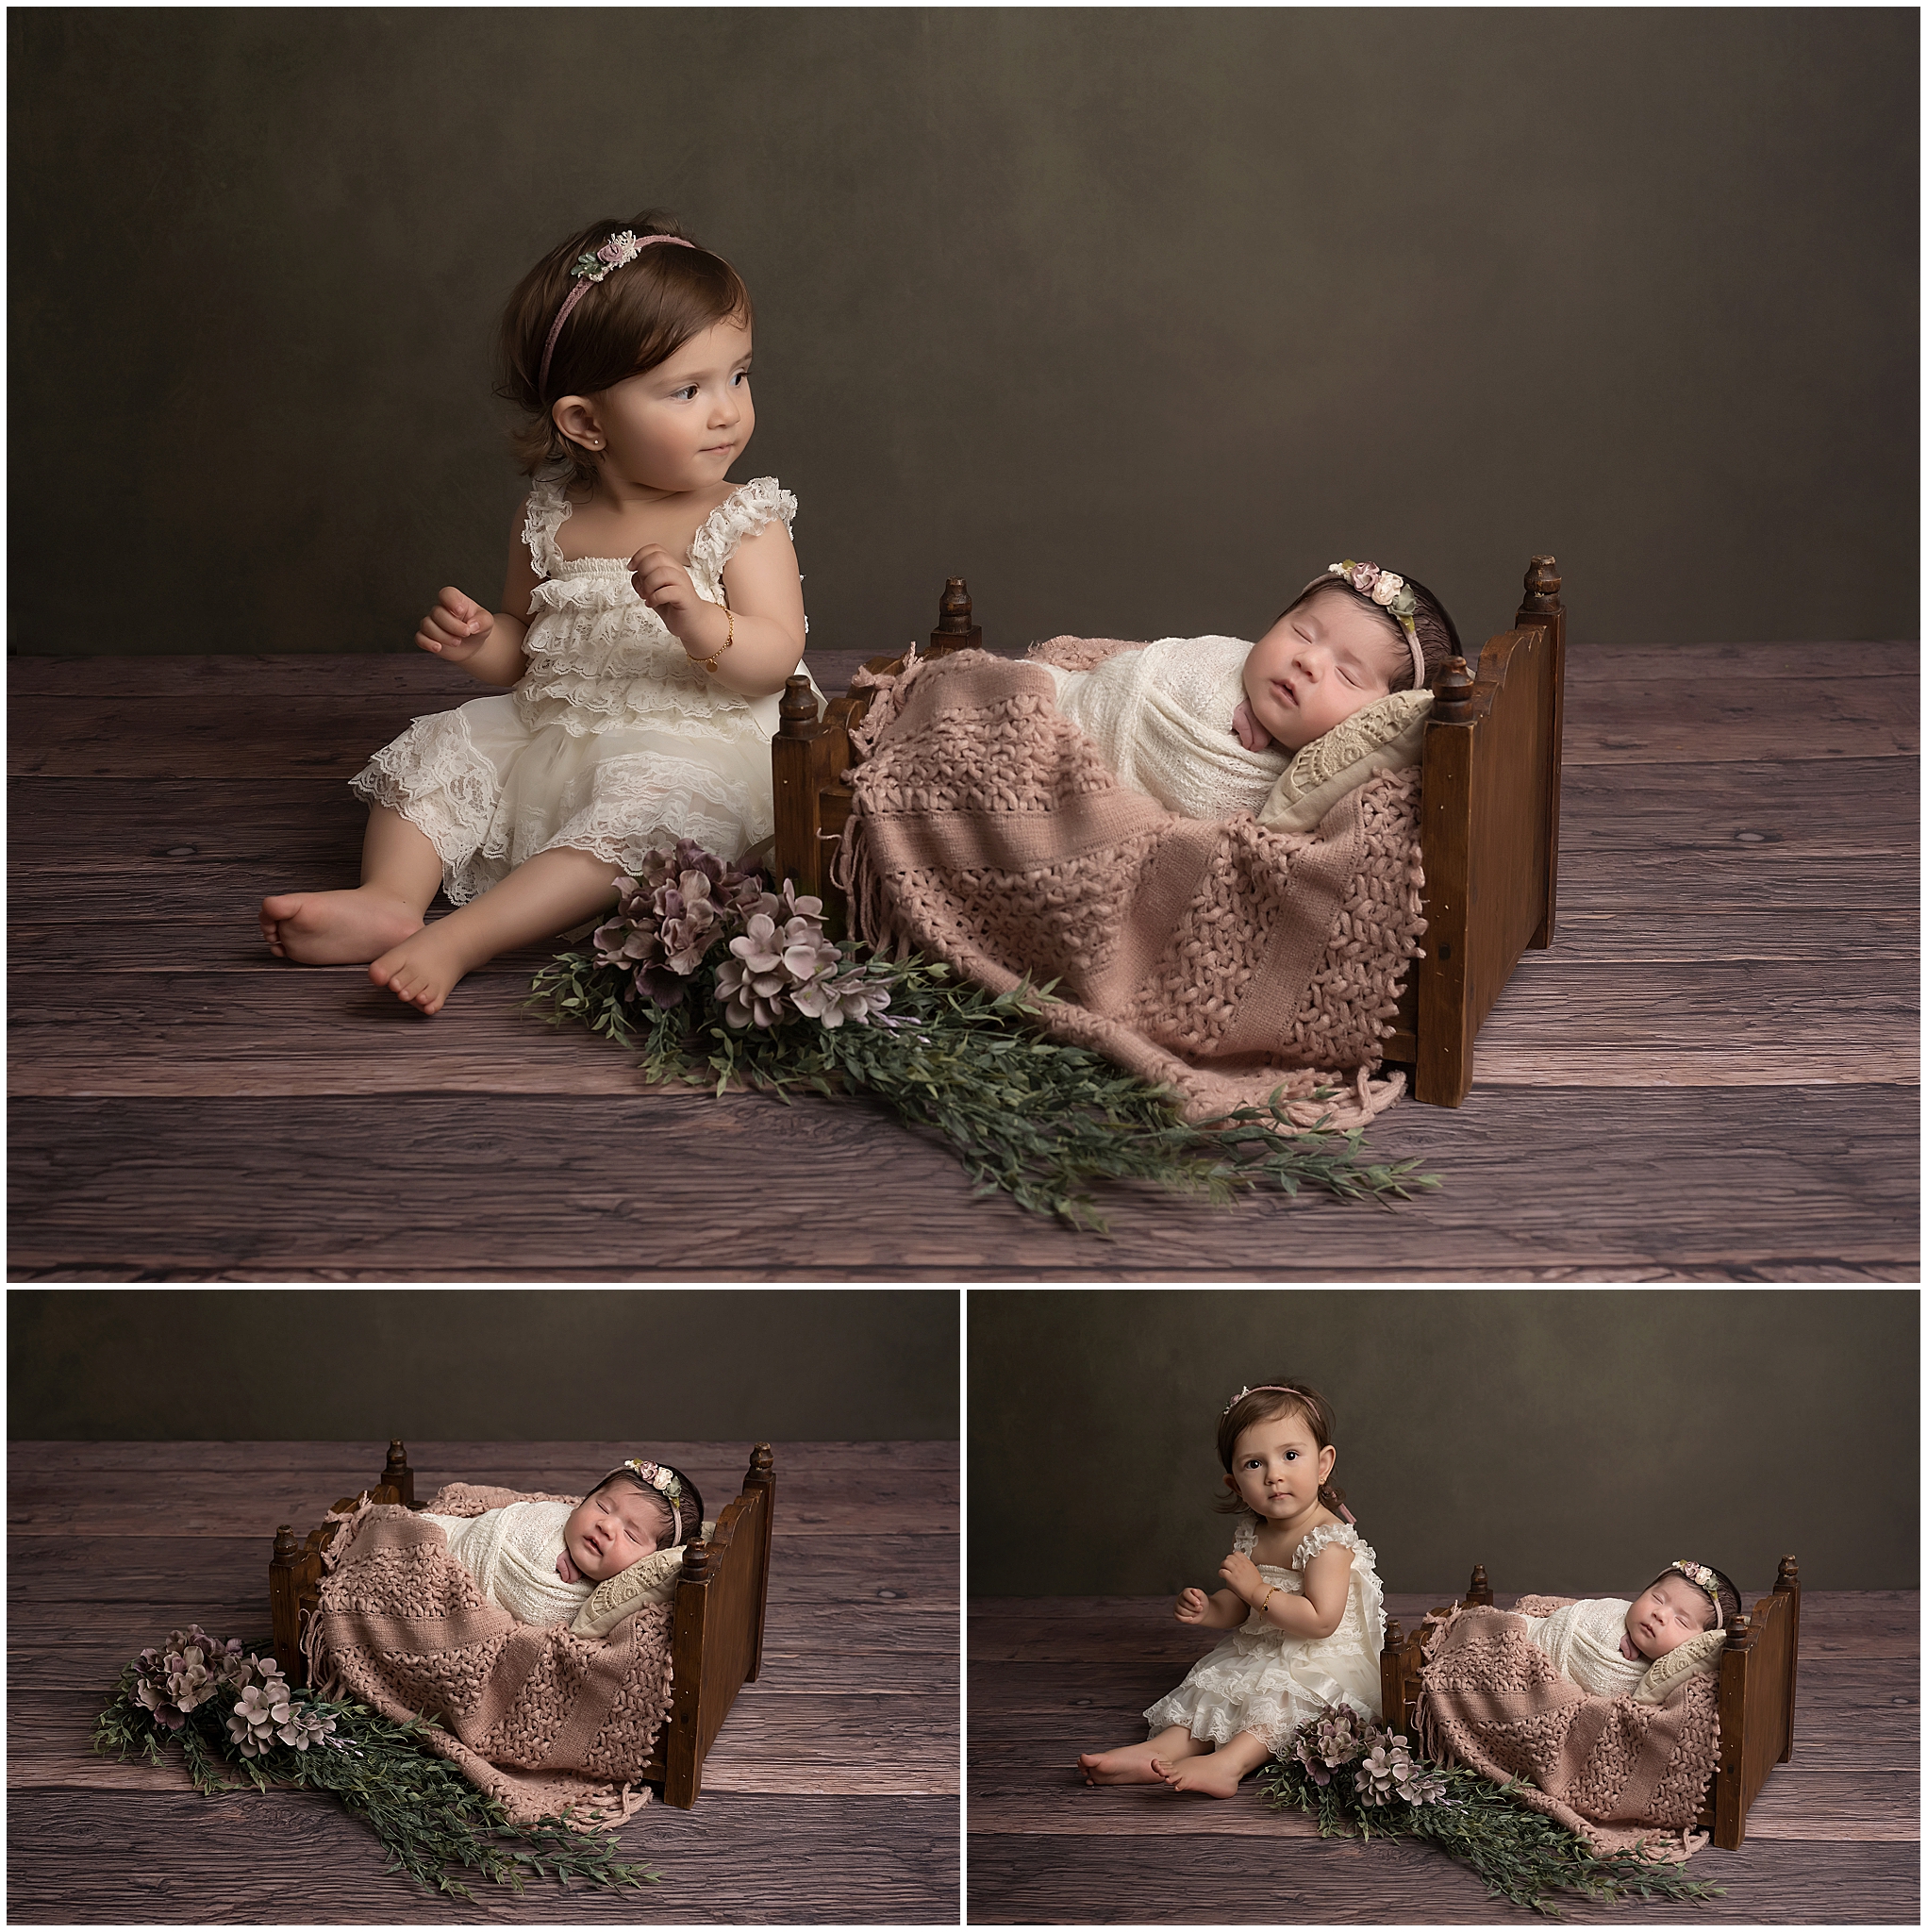 siblngs posing together during newborn photo session in london ontario